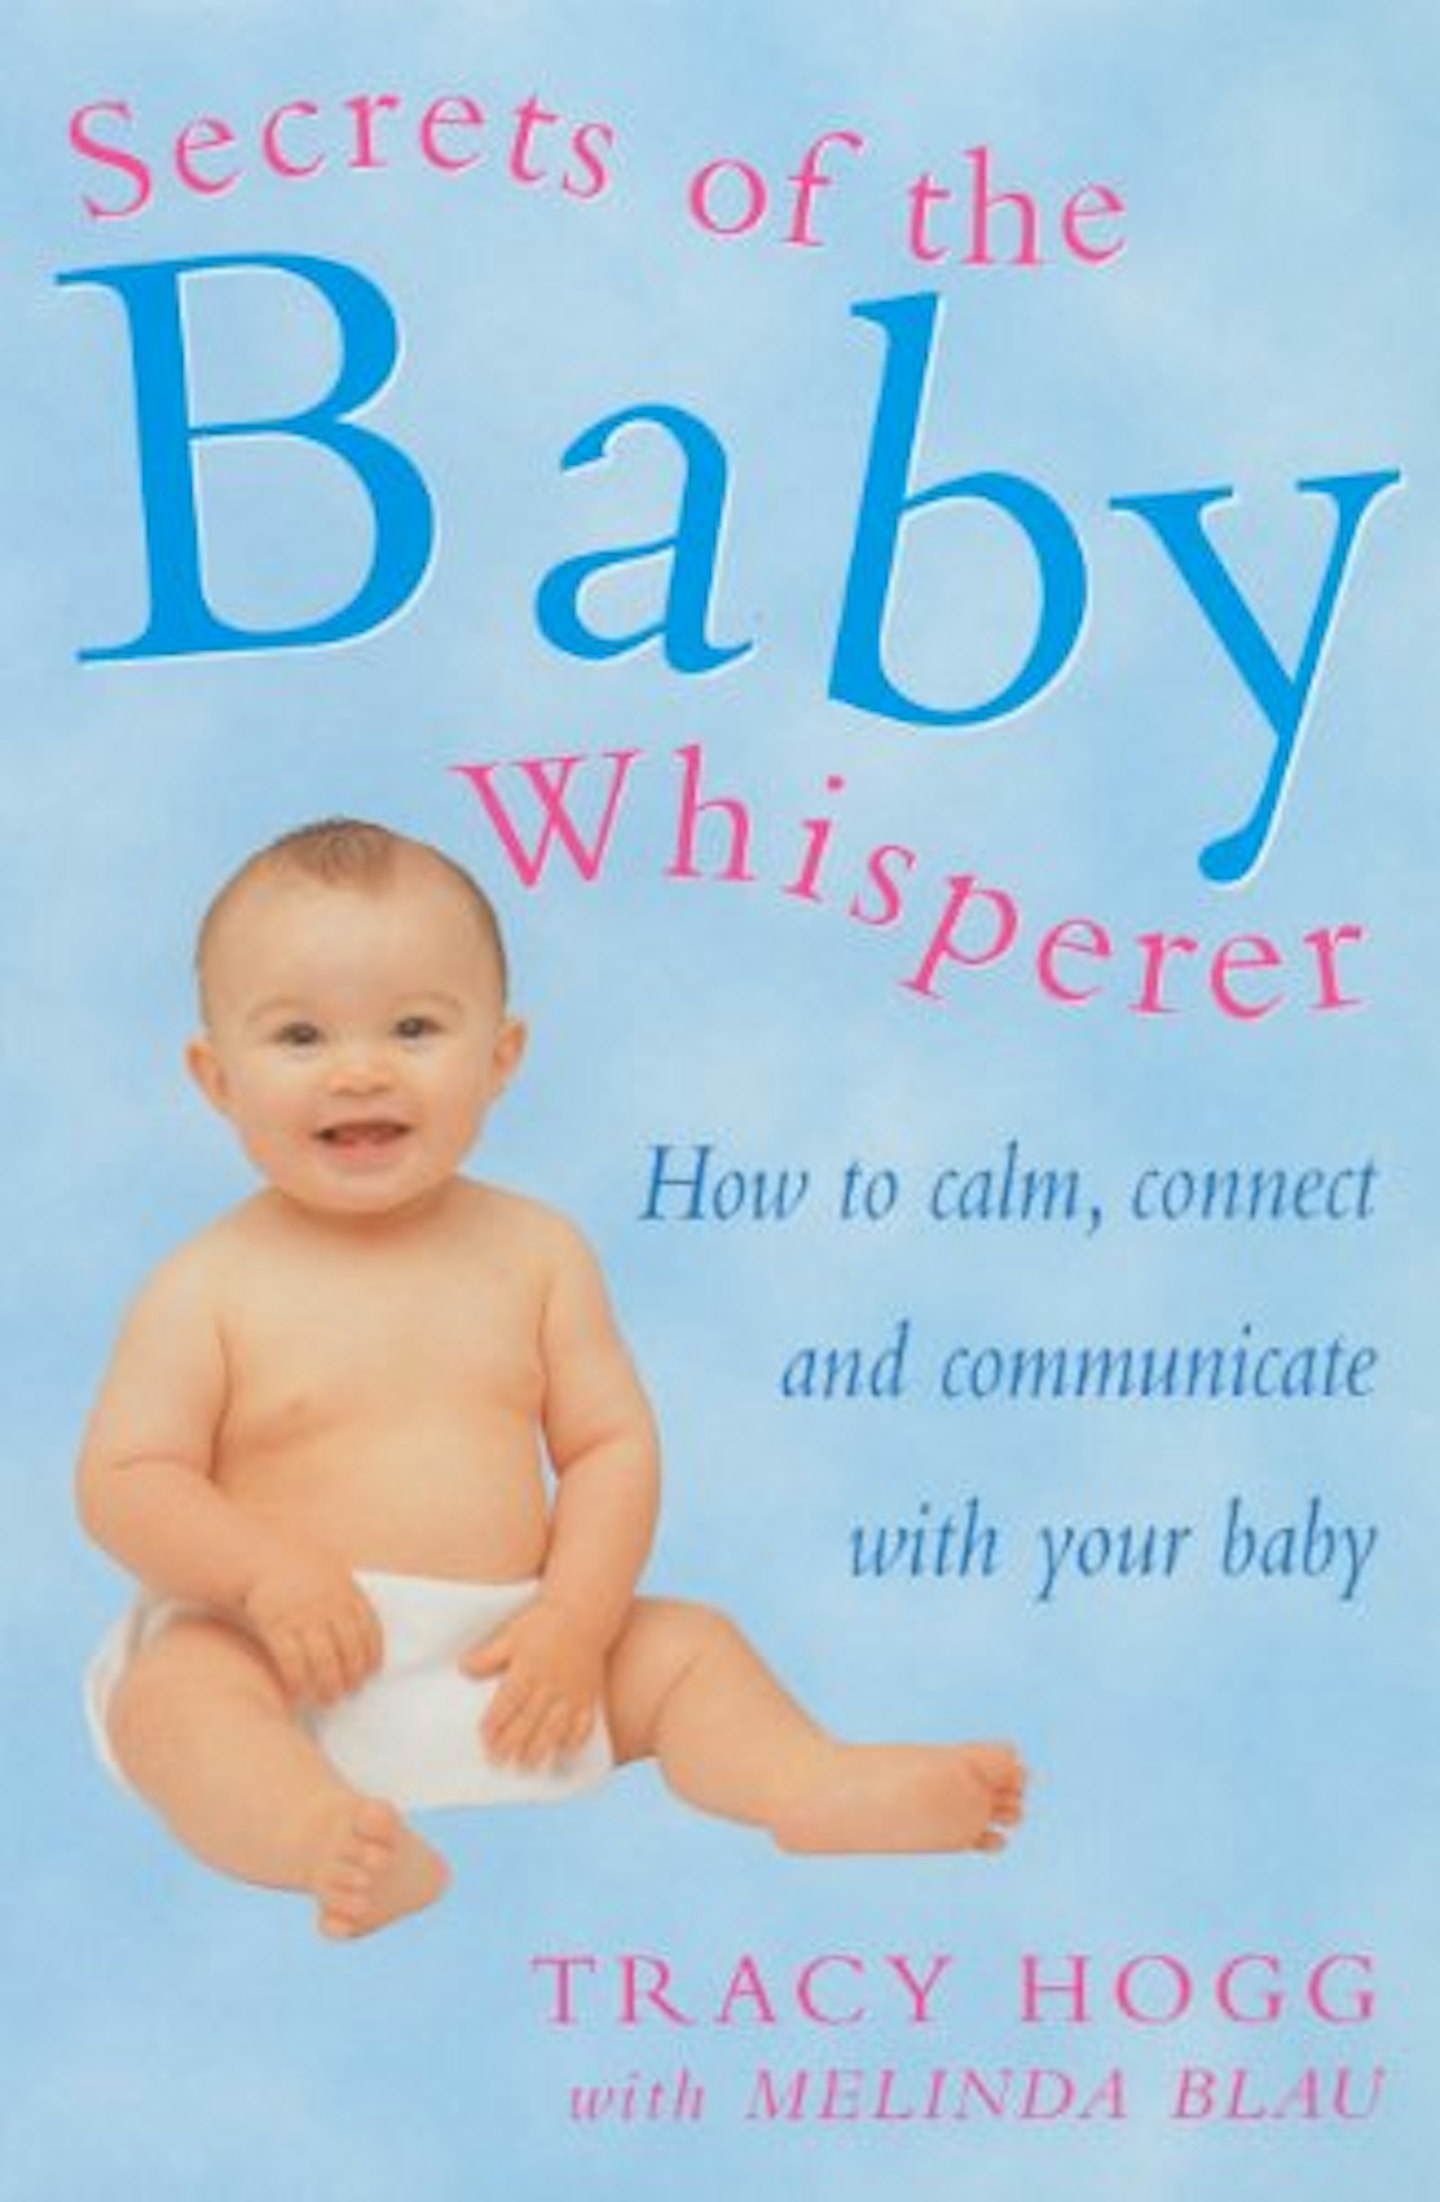 Secrets Of The Baby Whisperer: How to Calm, Connect and Communicate with your Baby by Tracy Hogg and Melinda Blau 